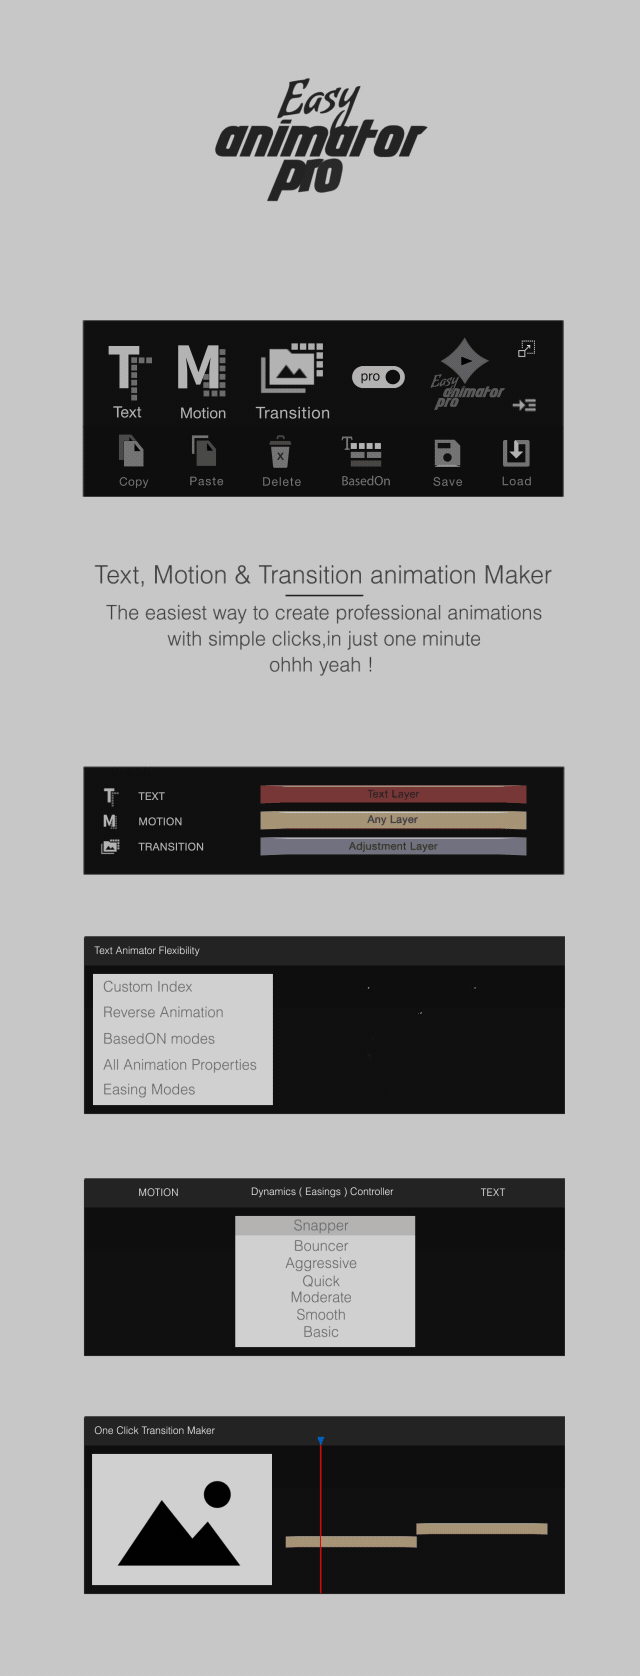 Easy Animator Pro | All In One Animation Maker For Text , Motion & Transitions - 1